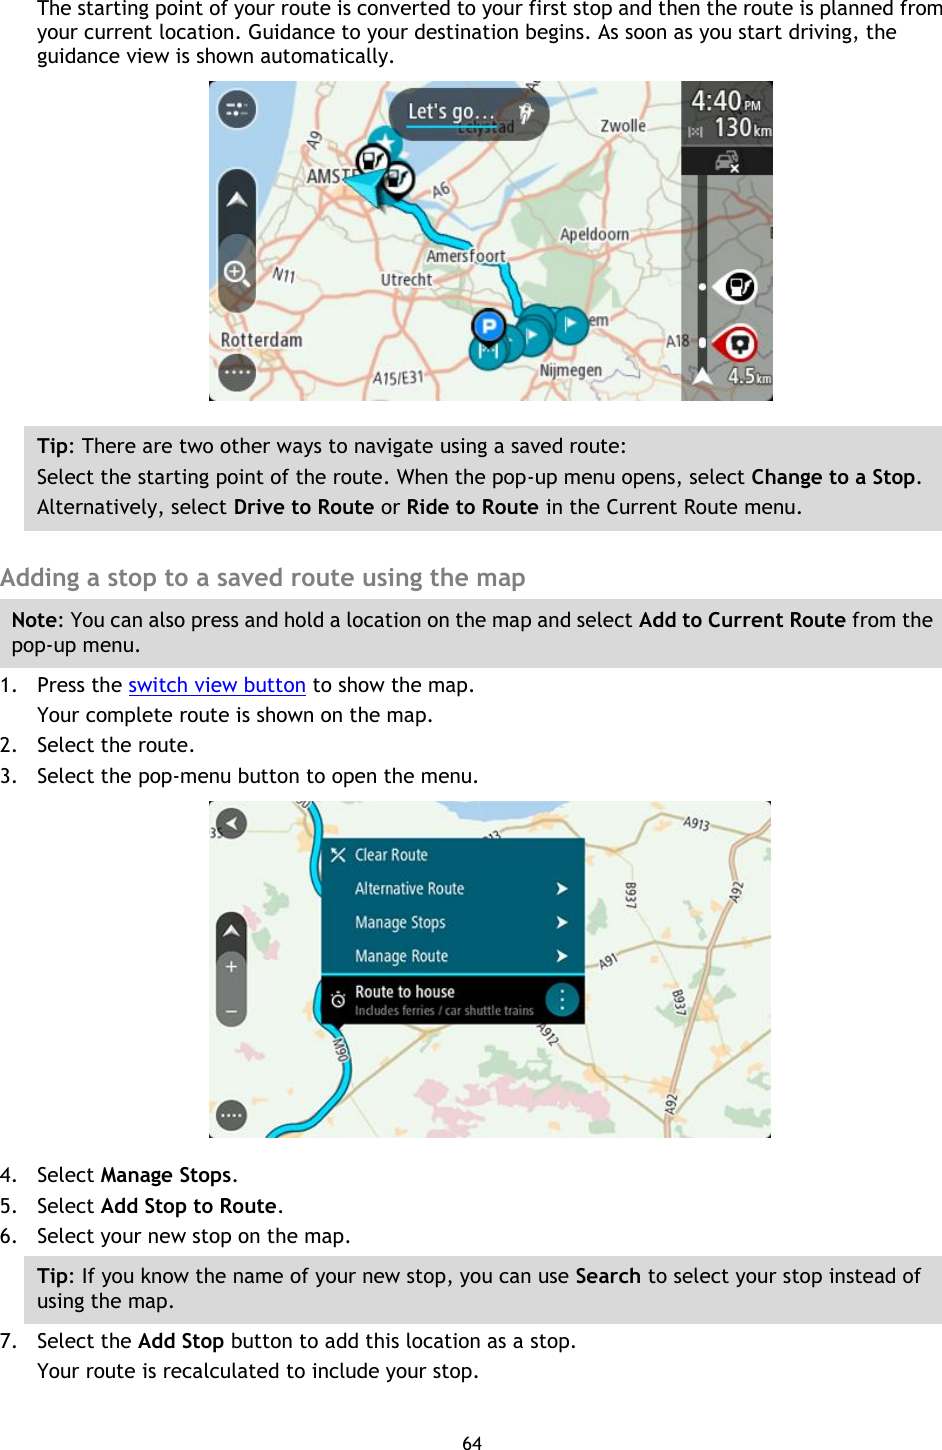 64    The starting point of your route is converted to your first stop and then the route is planned from your current location. Guidance to your destination begins. As soon as you start driving, the guidance view is shown automatically.  Tip: There are two other ways to navigate using a saved route: Select the starting point of the route. When the pop-up menu opens, select Change to a Stop. Alternatively, select Drive to Route or Ride to Route in the Current Route menu.  Adding a stop to a saved route using the map Note: You can also press and hold a location on the map and select Add to Current Route from the pop-up menu. 1. Press the switch view button to show the map. Your complete route is shown on the map. 2. Select the route. 3. Select the pop-menu button to open the menu.  4. Select Manage Stops. 5. Select Add Stop to Route. 6. Select your new stop on the map. Tip: If you know the name of your new stop, you can use Search to select your stop instead of using the map. 7. Select the Add Stop button to add this location as a stop. Your route is recalculated to include your stop. 